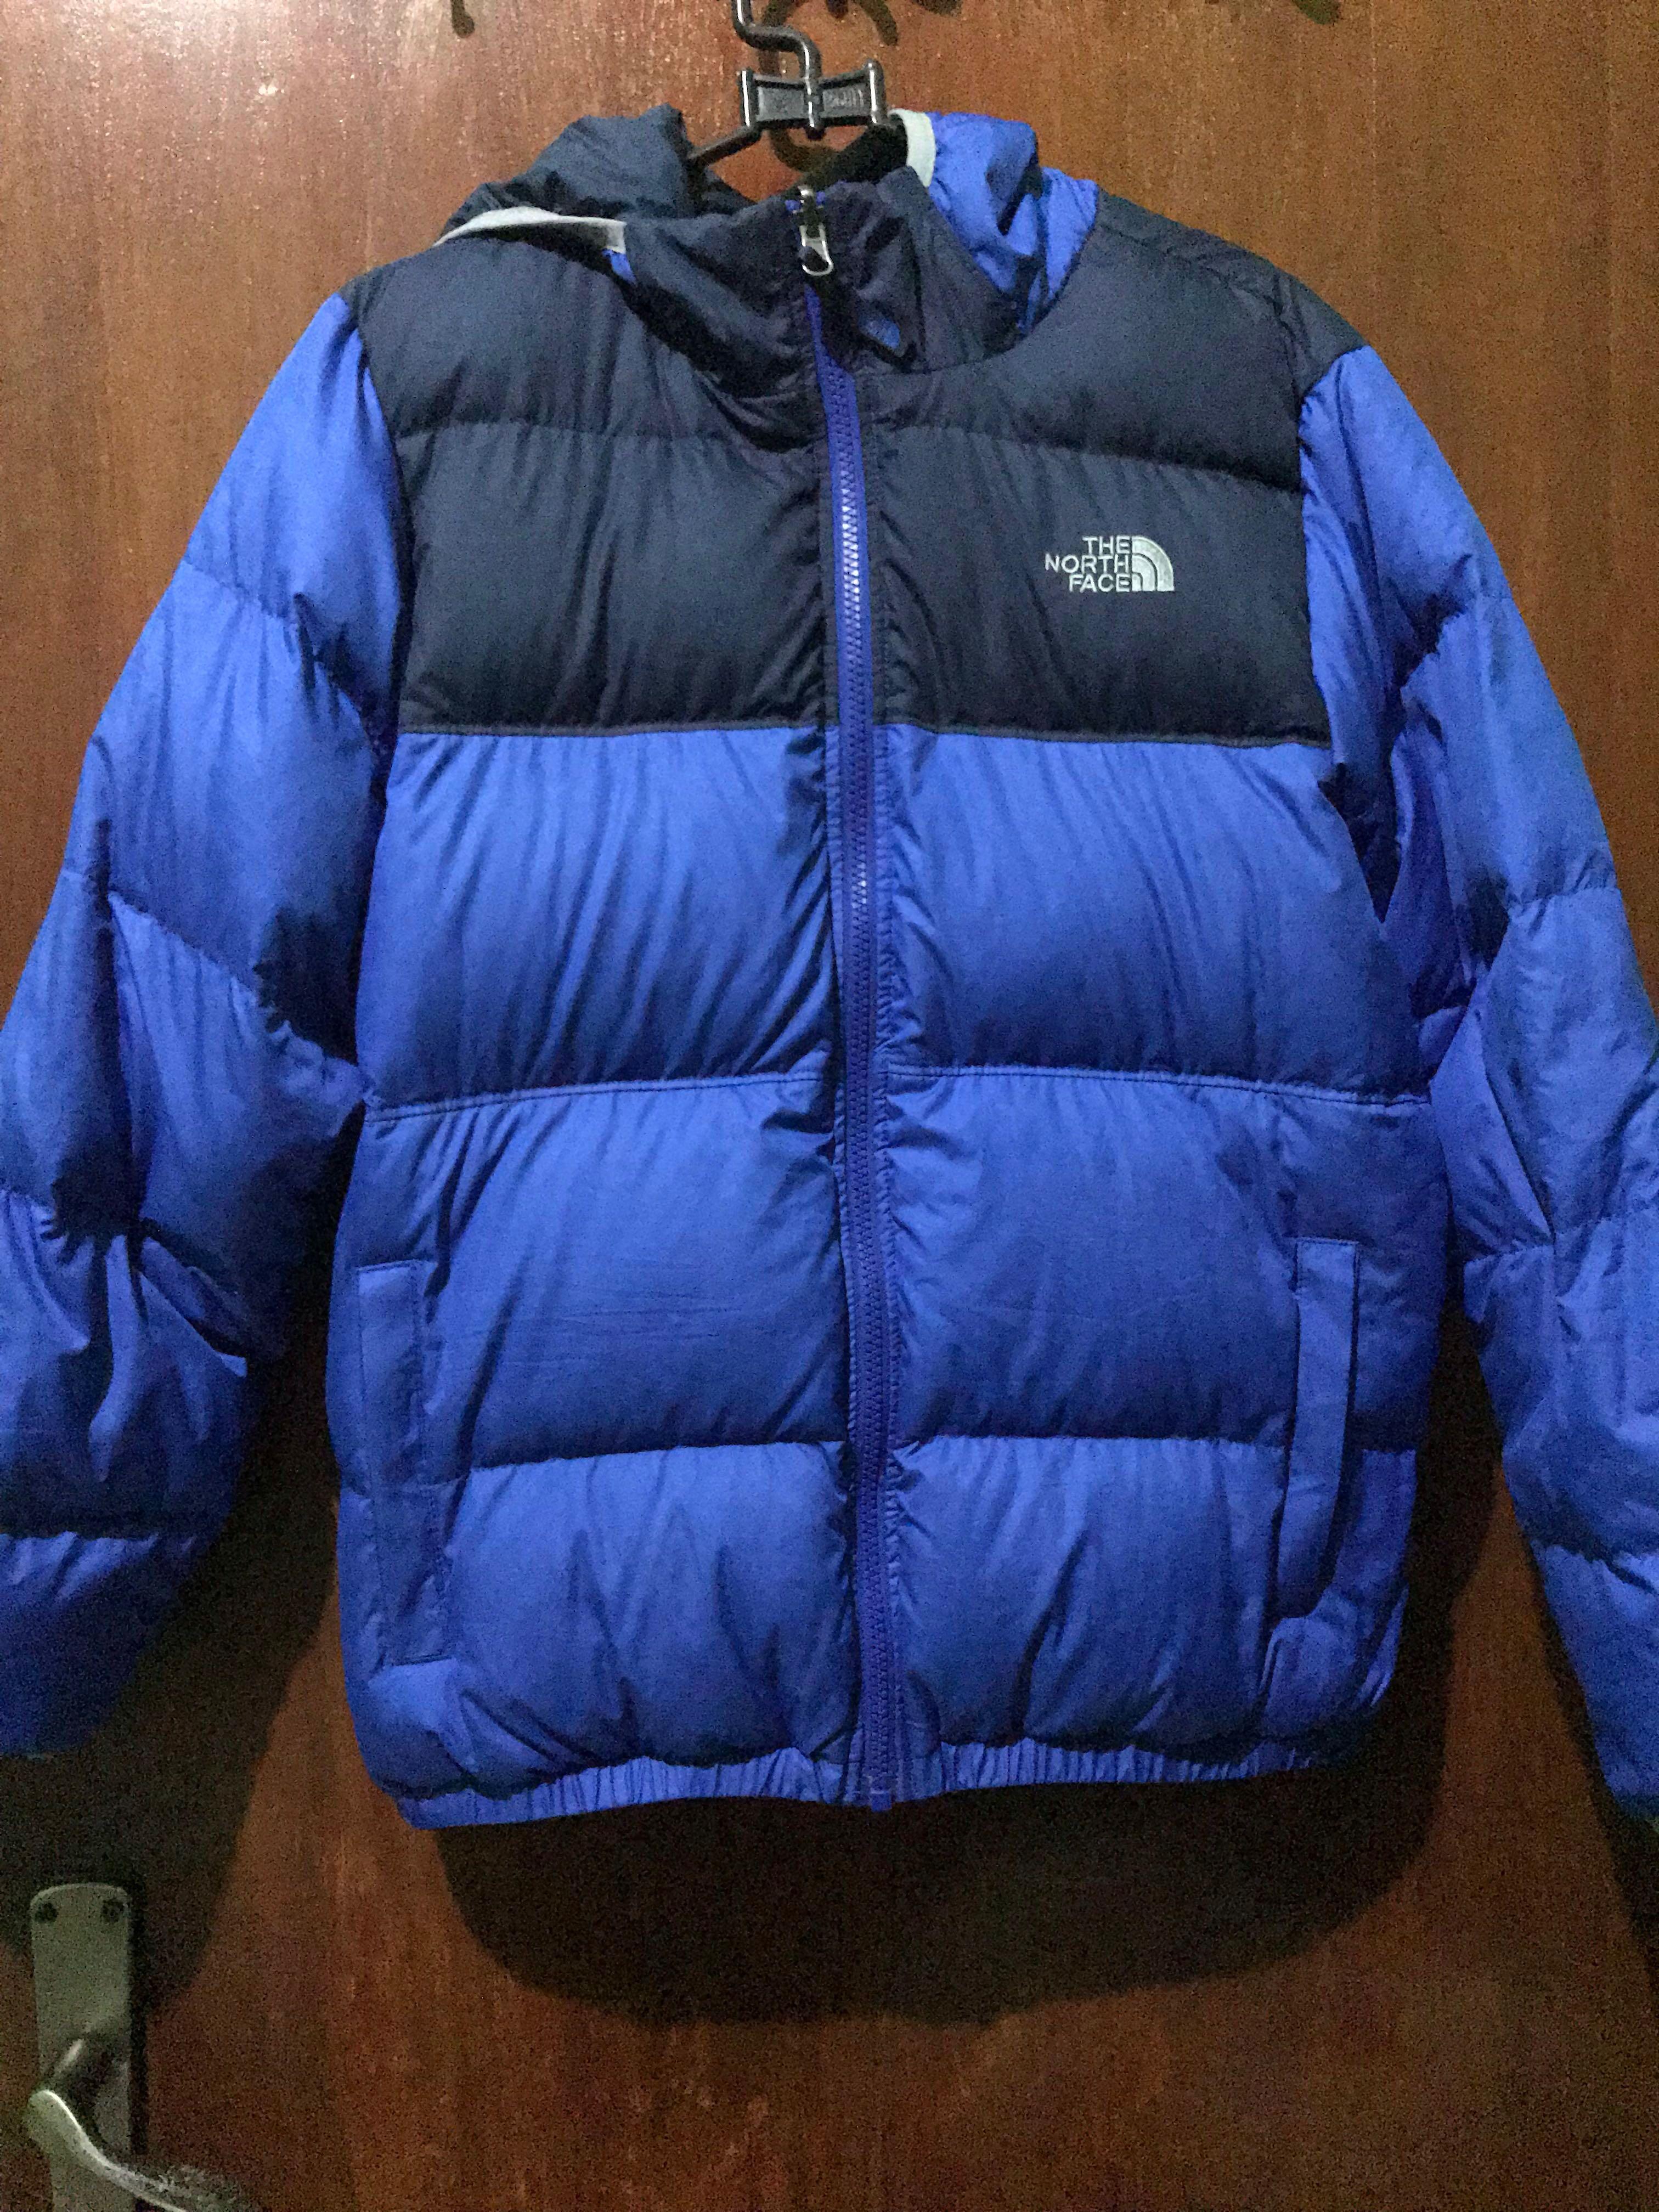 Jaket the north face duck down, Jaket 